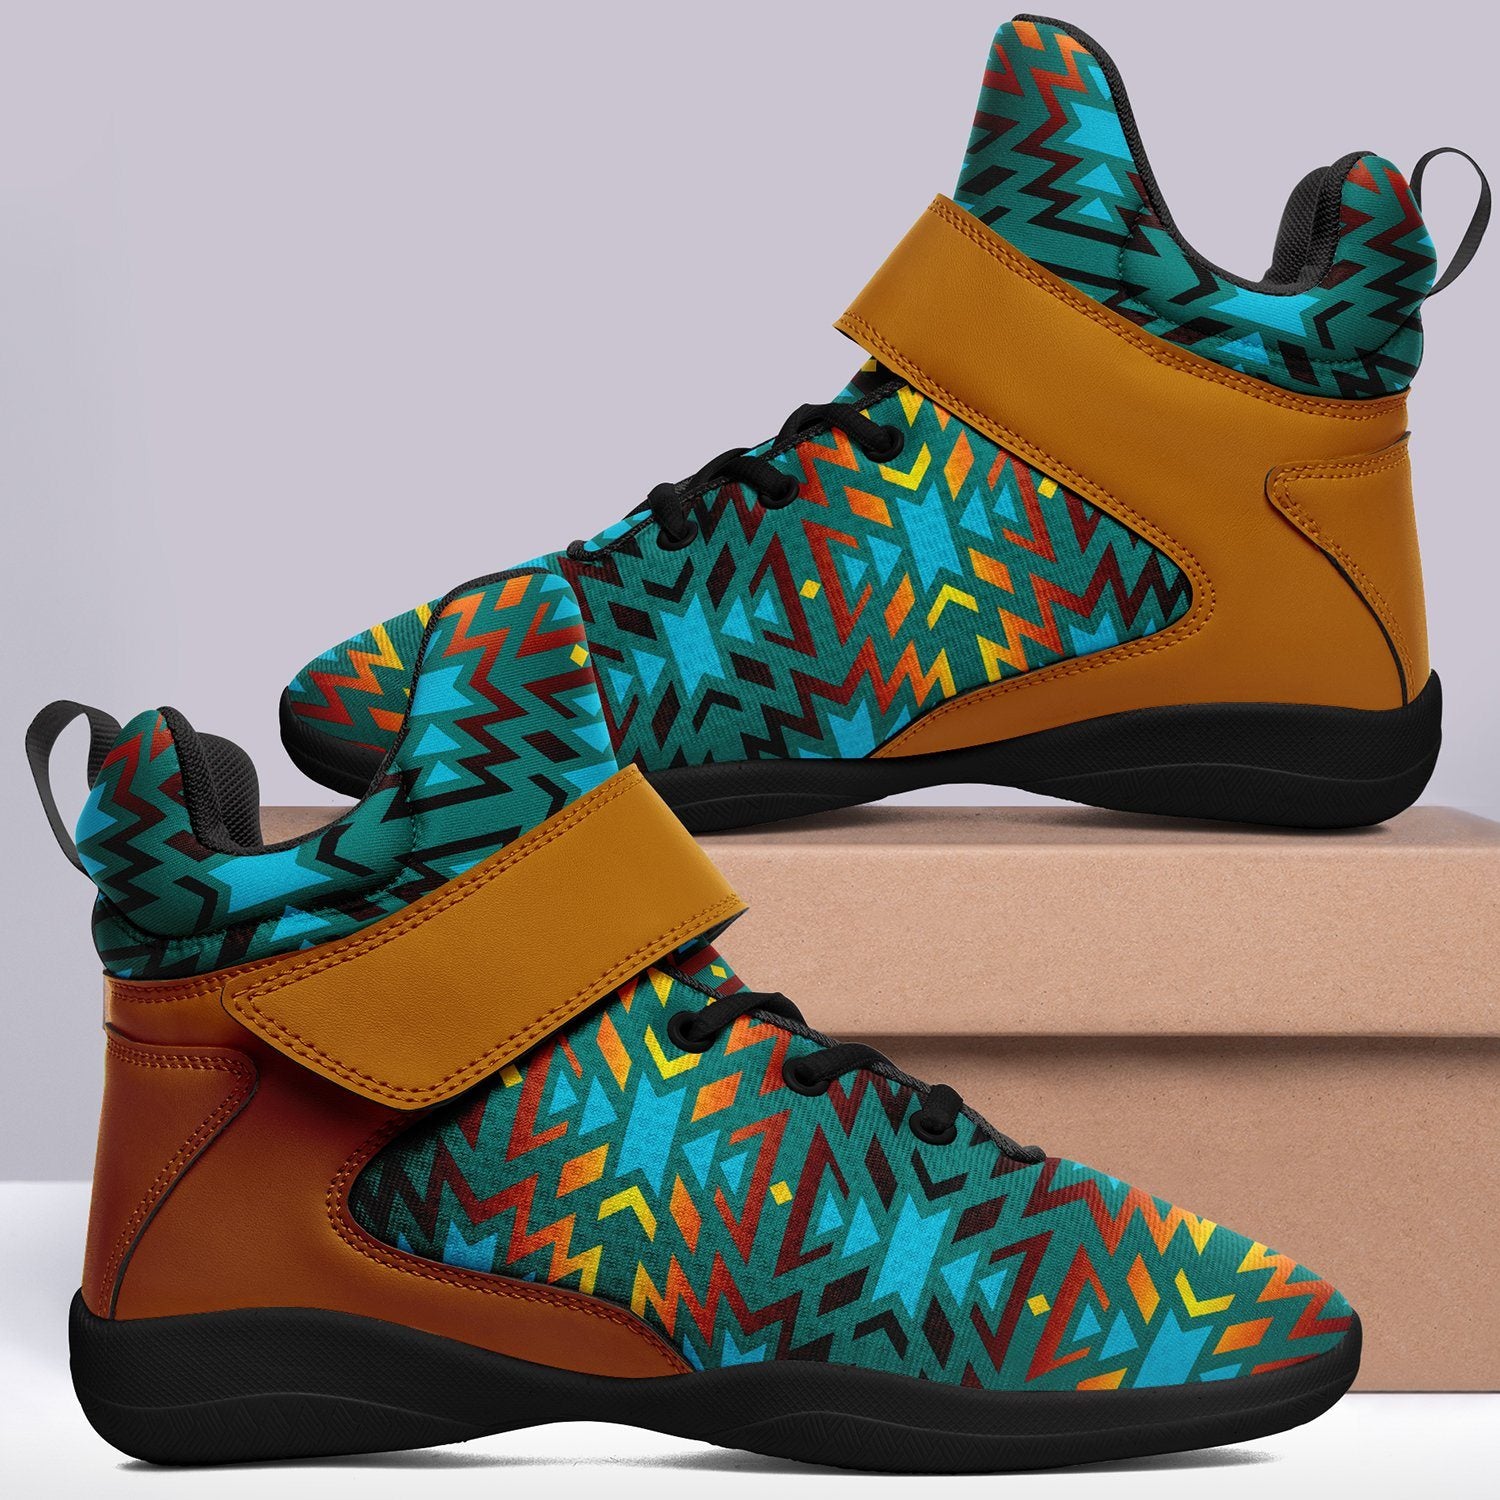 Fire Colors and Turquoise Teal Ipottaa Basketball / Sport High Top Shoes 49 Dzine 